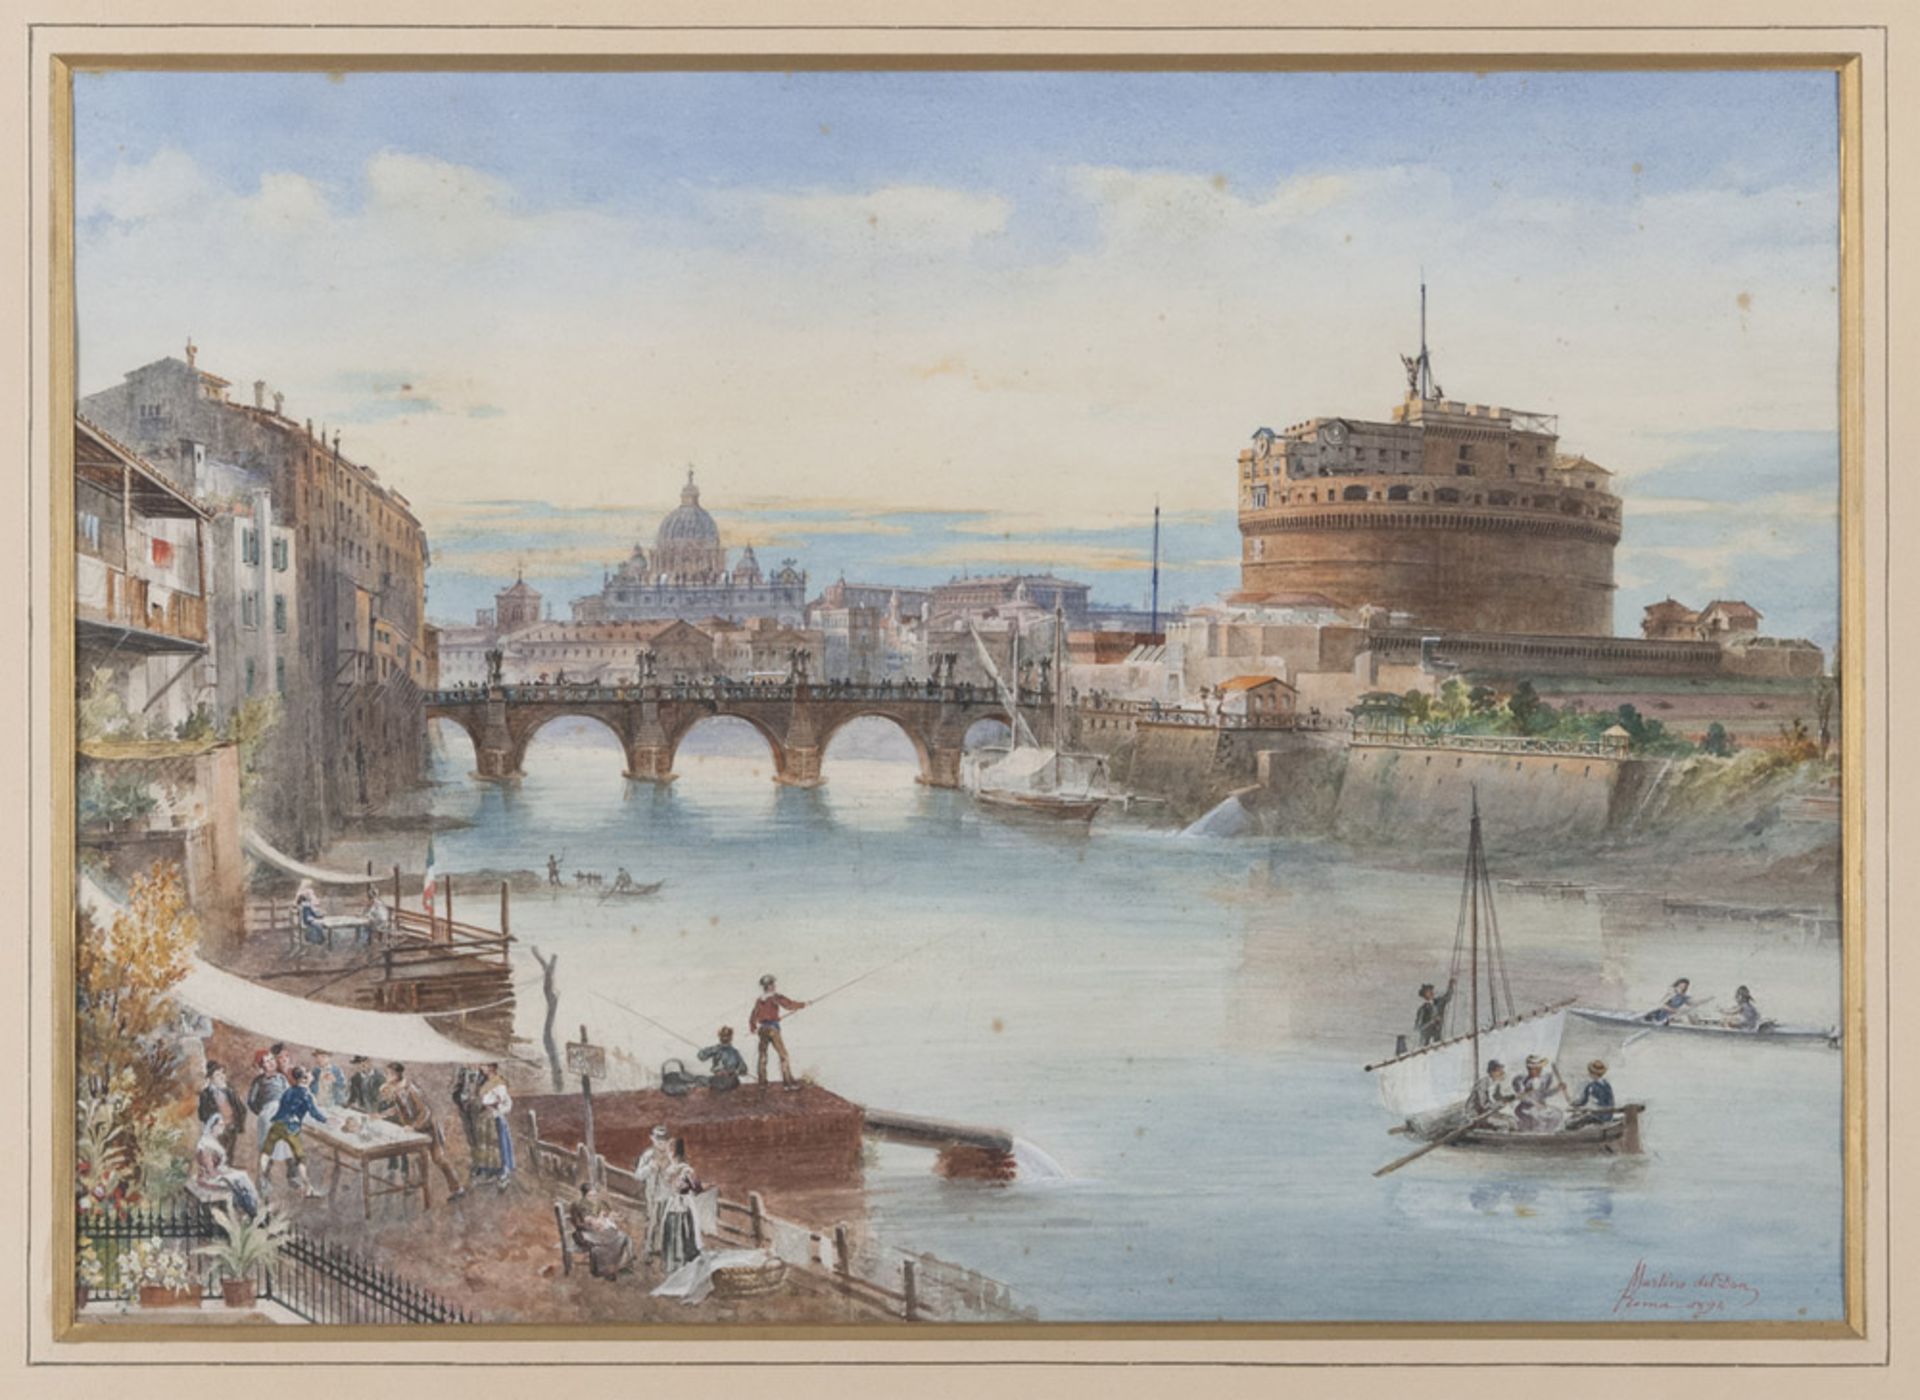 Martino Del Don (Italy, 19th century). View of Castel sant'Angelo from the Tiber with scenes of